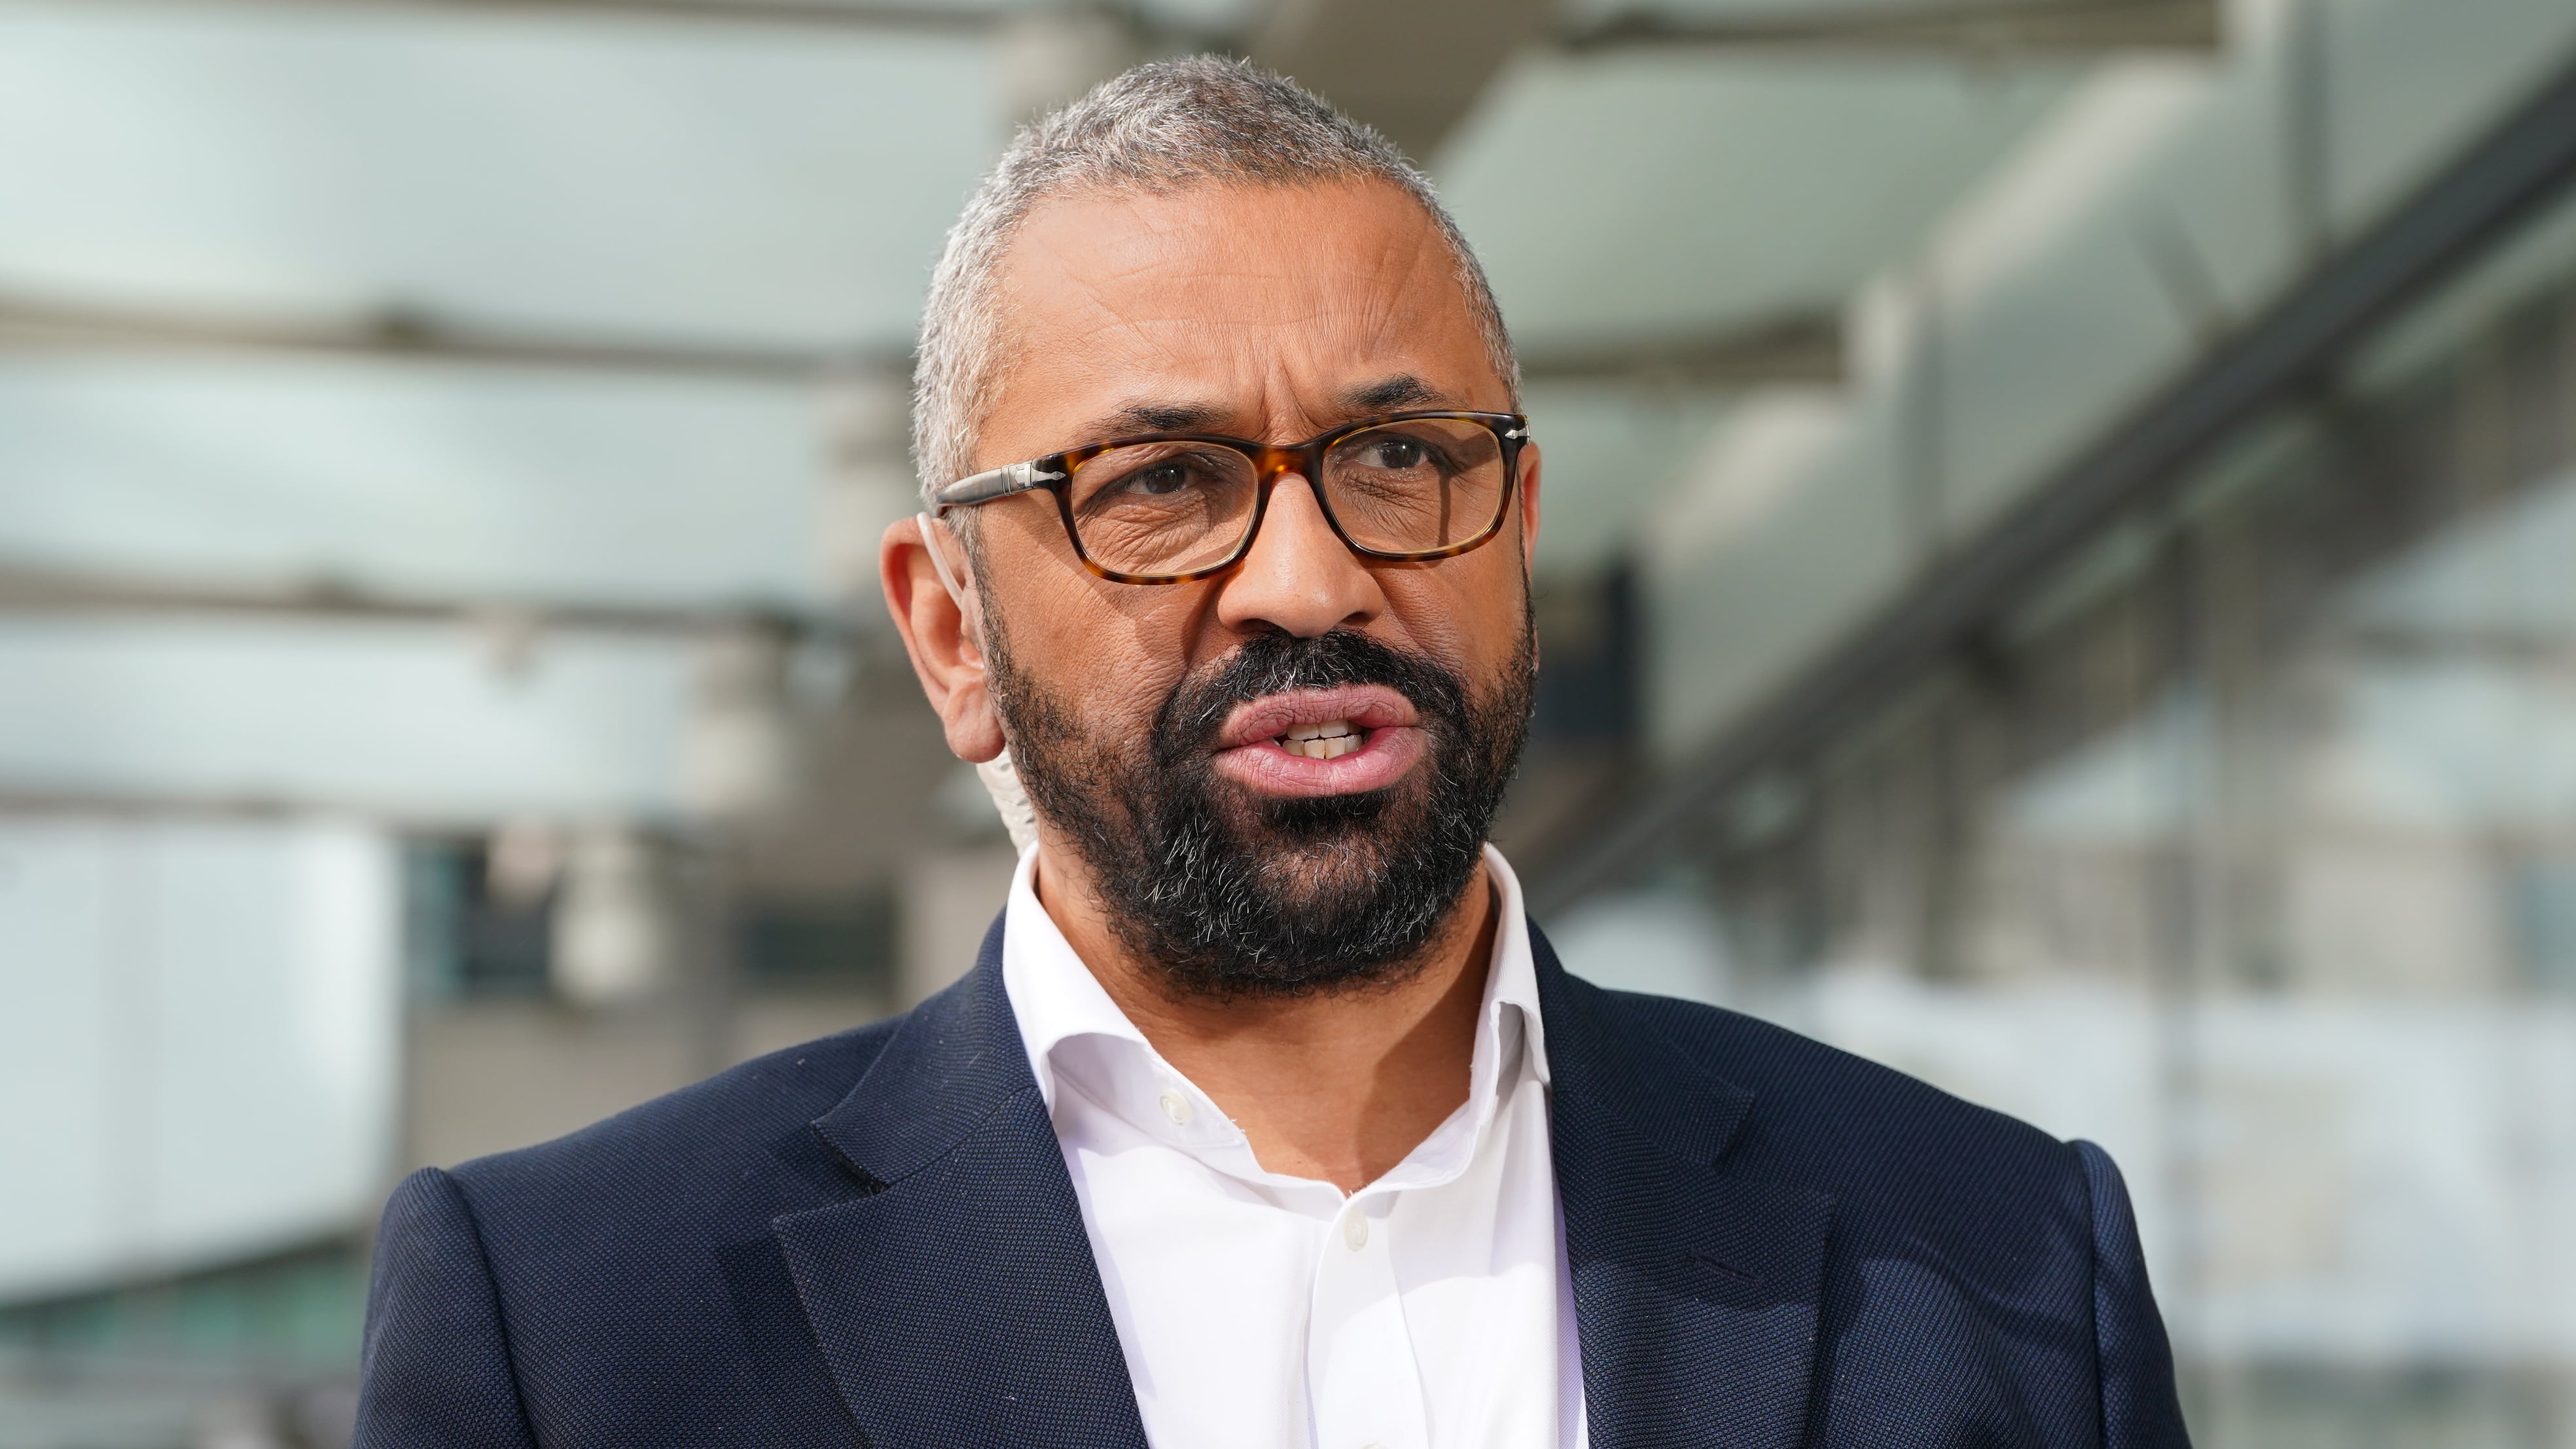 Home Secretary James Cleverly speaking to the media outside BBC Broadcasting House after appearing on Sunday with Laura Kuenssberg